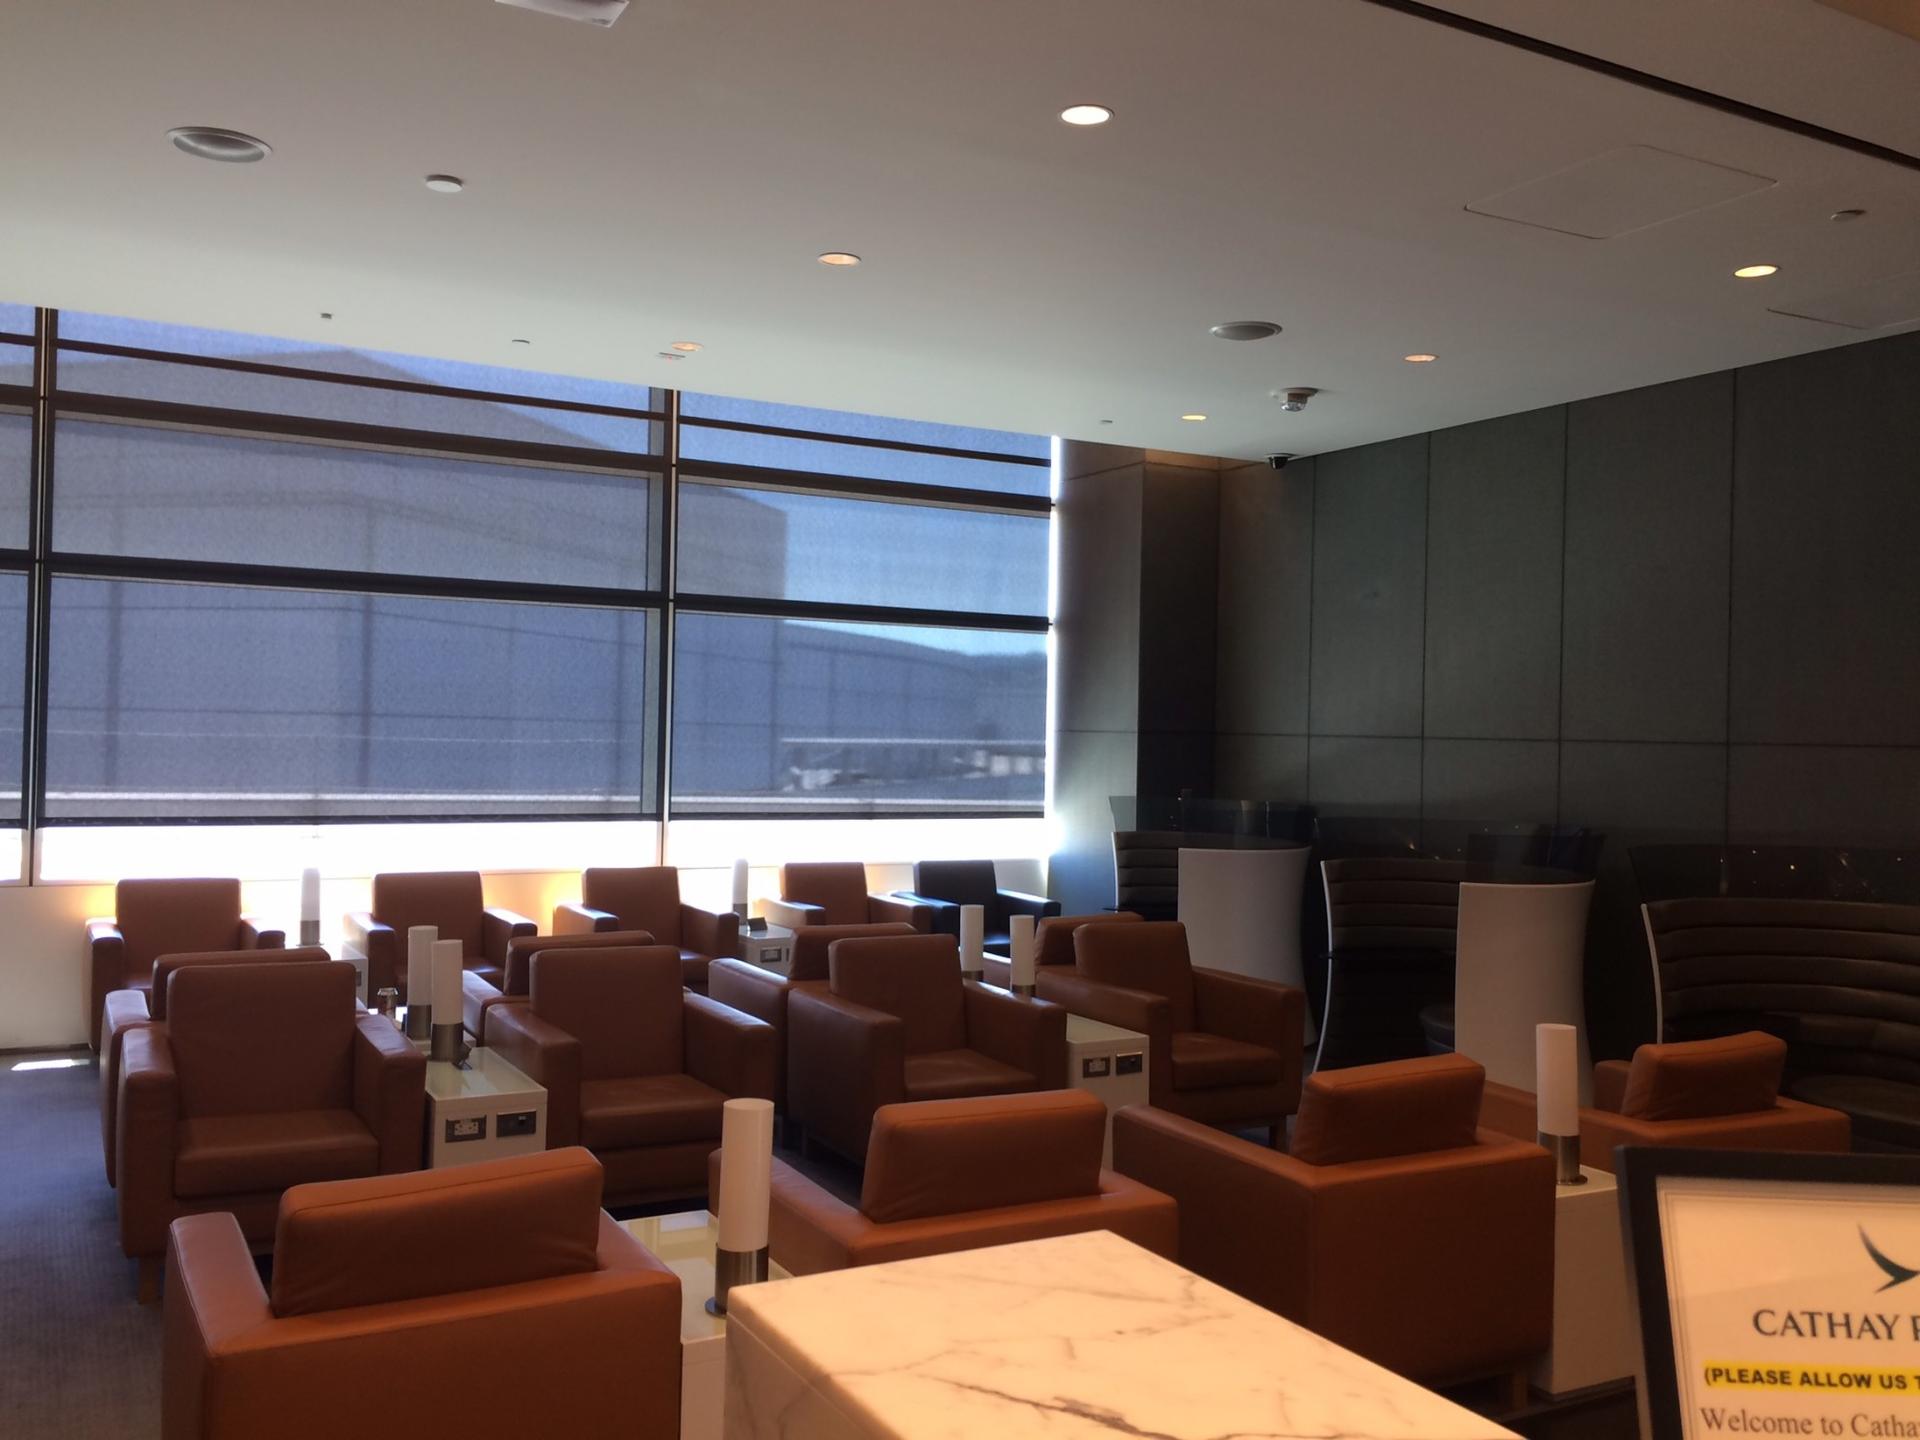 Cathay Pacific First and Business Class Lounge image 66 of 74